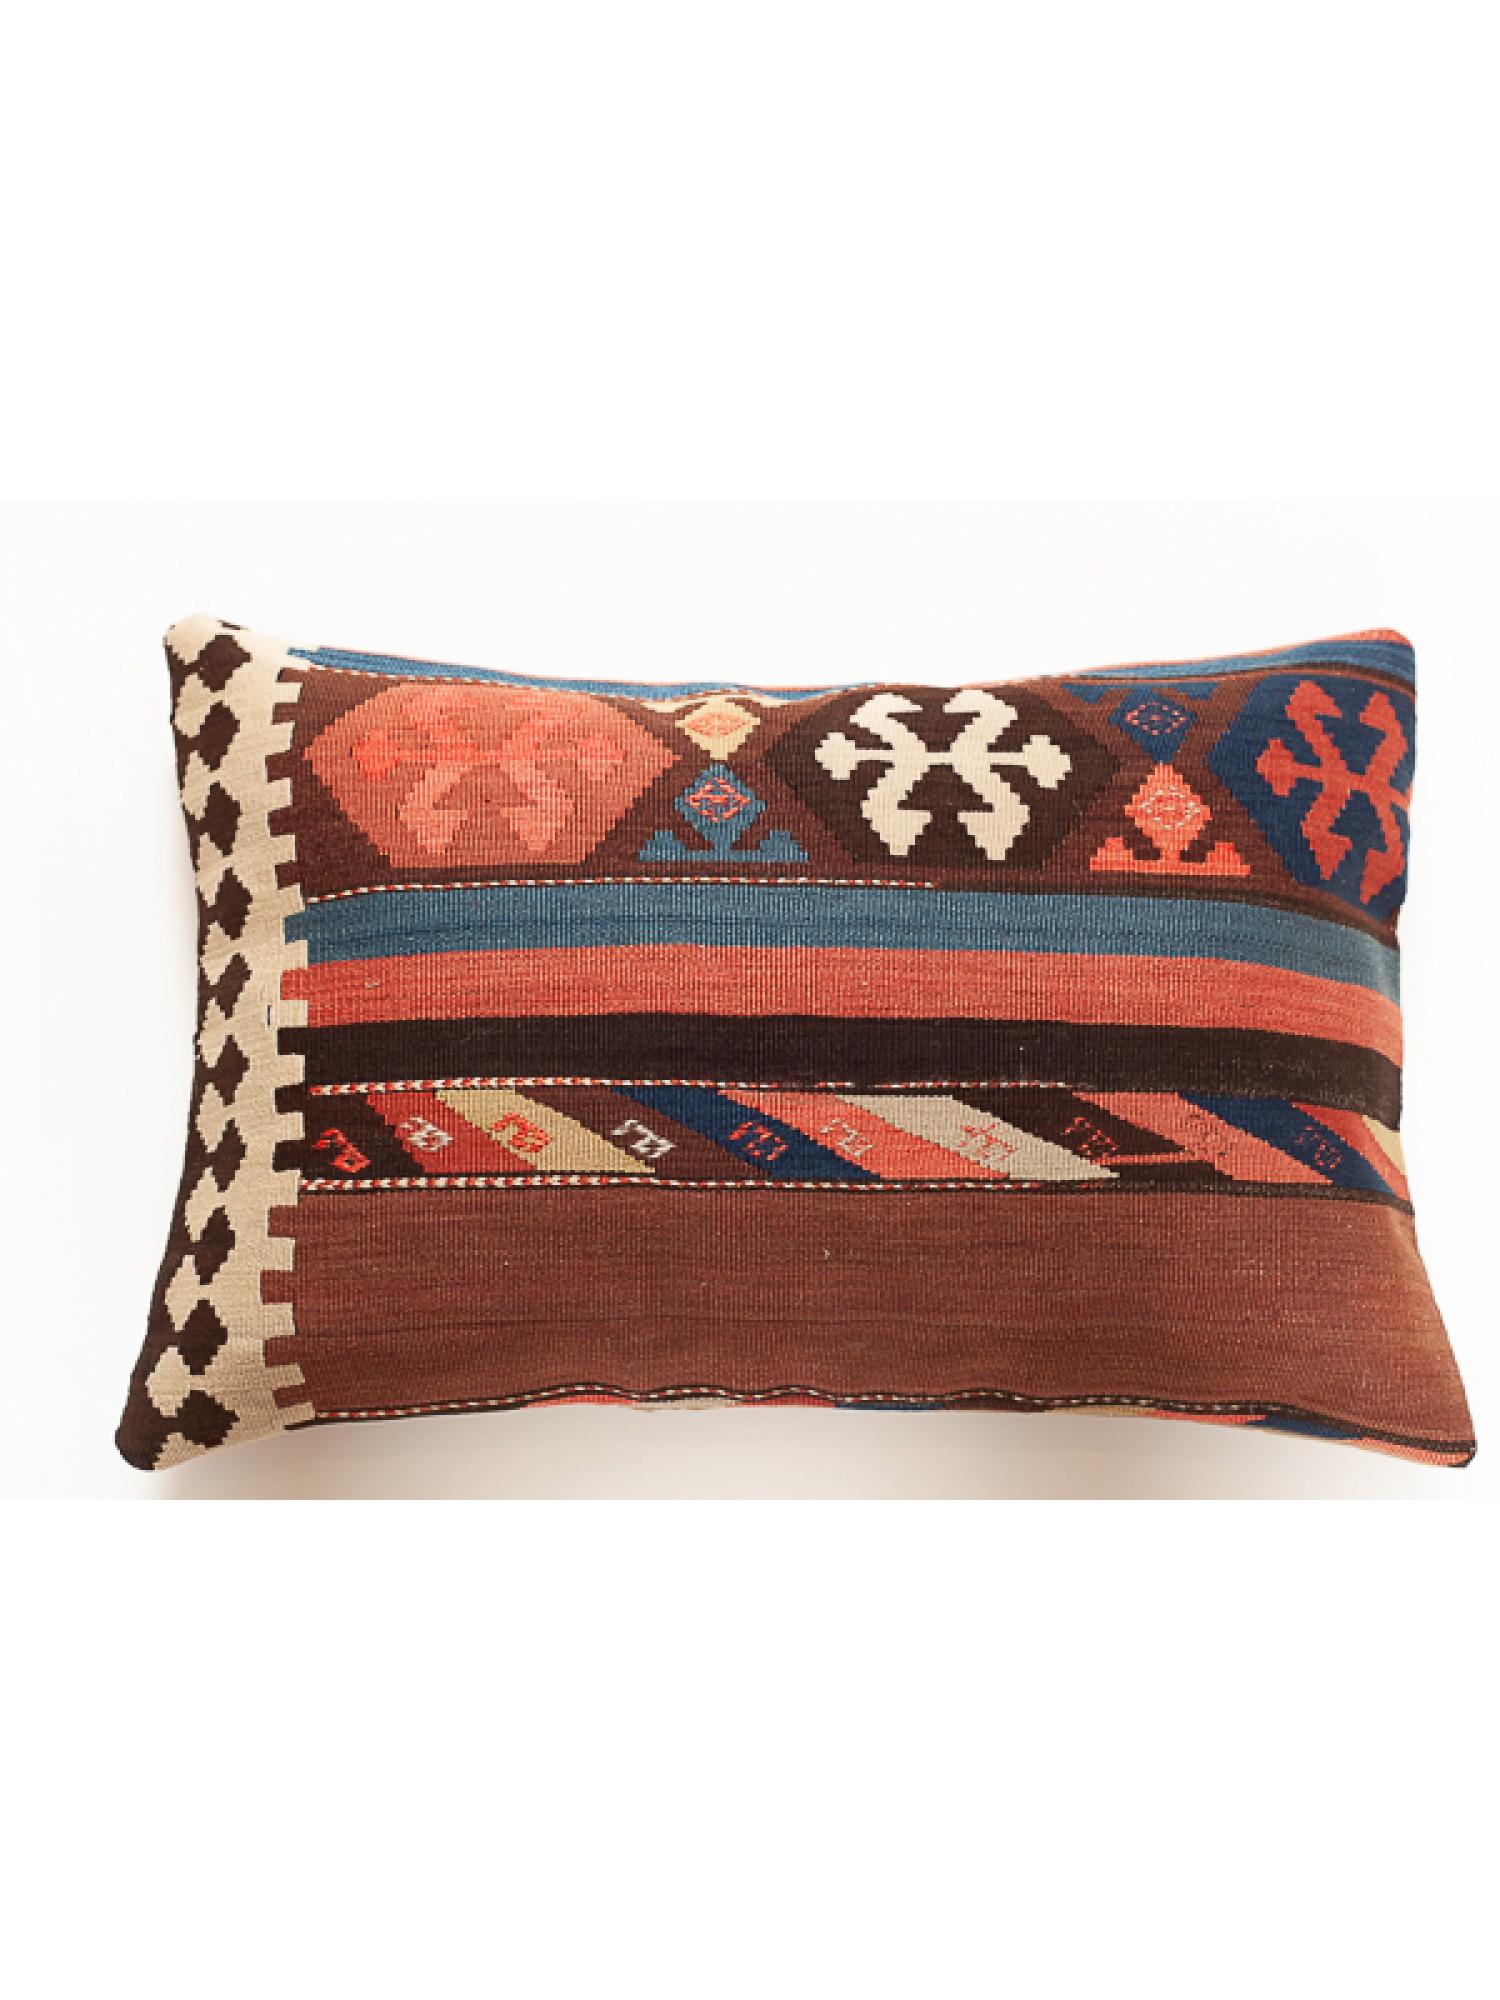 We made a cushion cover using the undamaged part of the precious and high-quality old & antique kilims that cannot be repaired as a whole. Like a painting, a part of the scenery is cut out from a Kilim, and even several covers cut out from the same